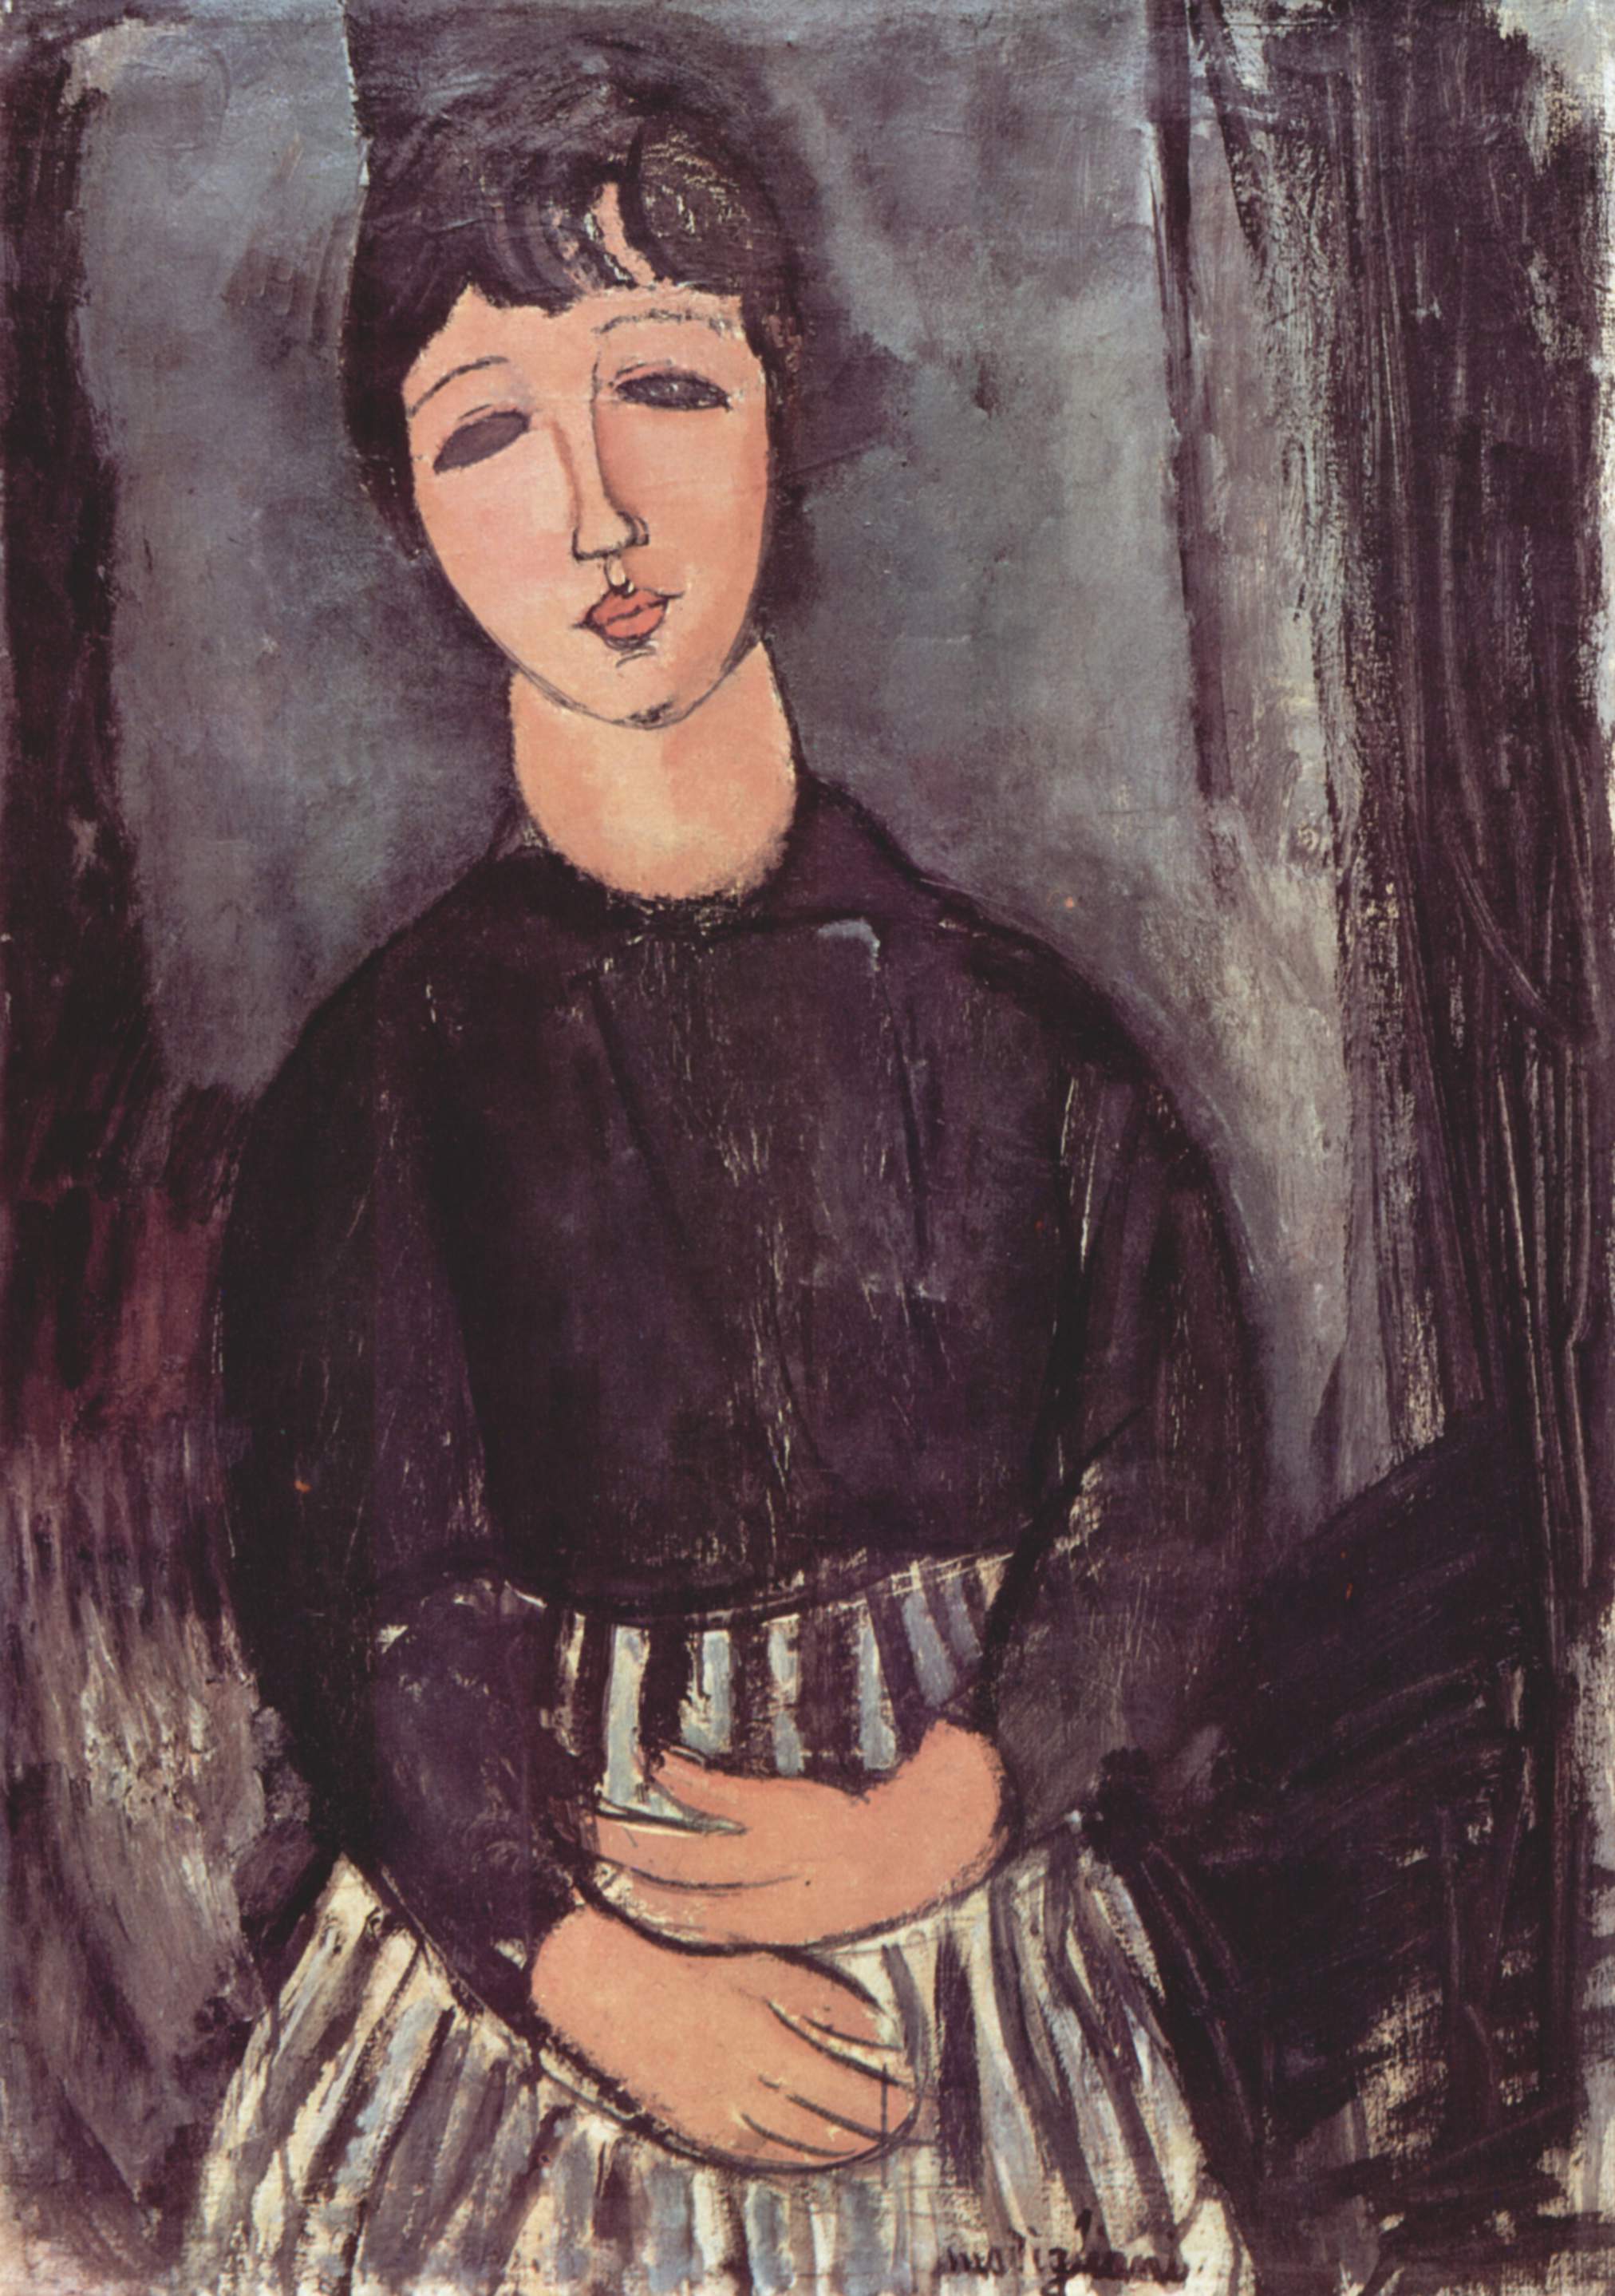 'Portrait of a Lady's Maid' Amedeo Modgliani Oil on canvas, 100cm x 65cm, 1916 Private Collection, Paris (Source/Photographer: The Yorck Project: 10.000 Meisterwerke der Malerei. DVD-ROM, 2002. ISBN 3936122202. Distributed by DIRECTMEDIA Publishing GmbH)